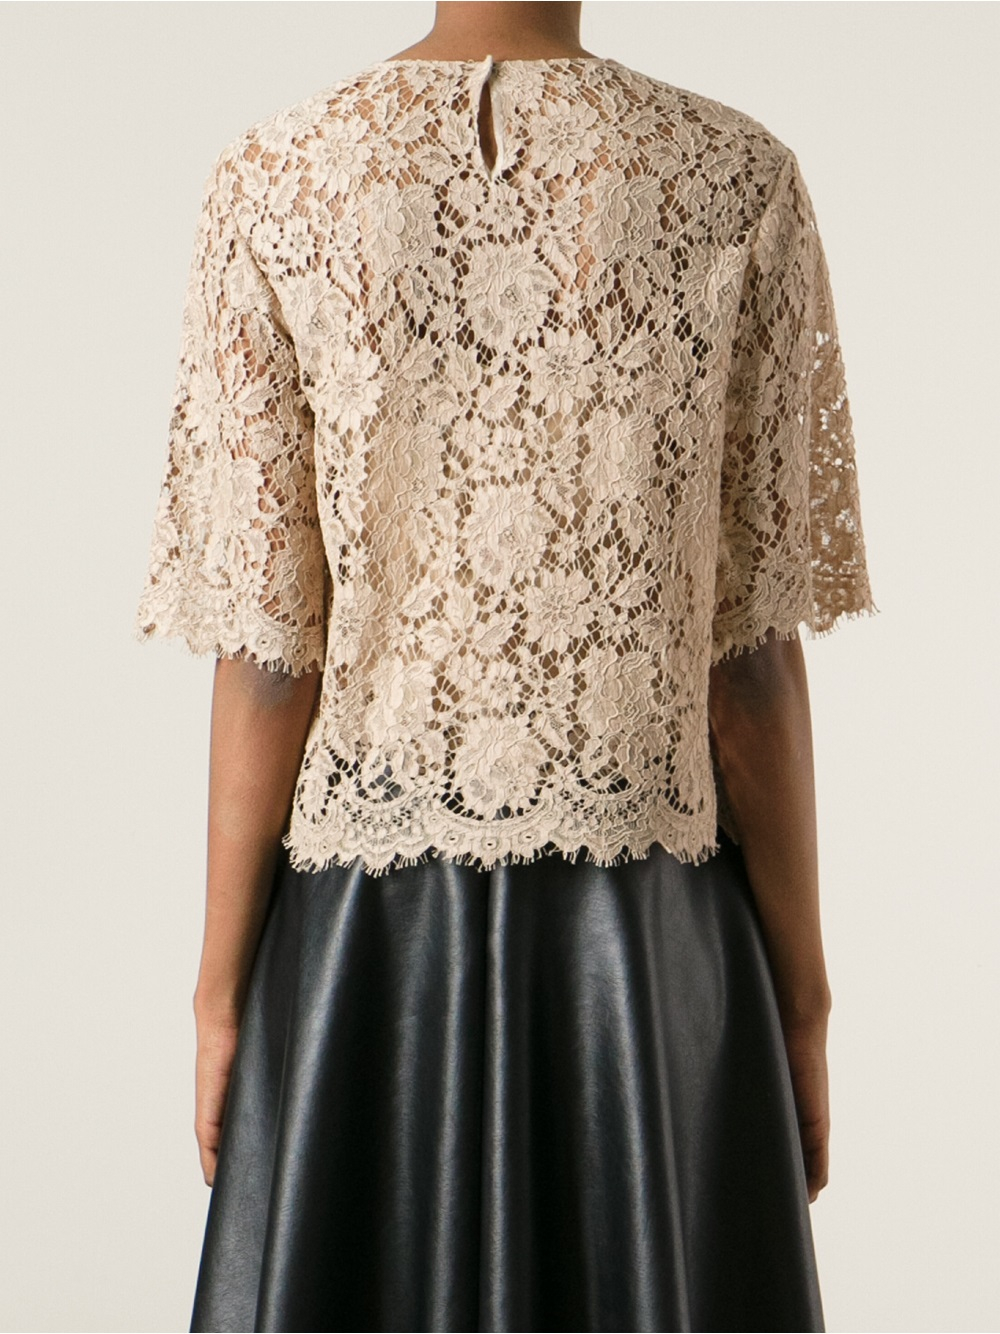 Dolce & Gabbana Floral Lace Blouse in Natural - Lyst